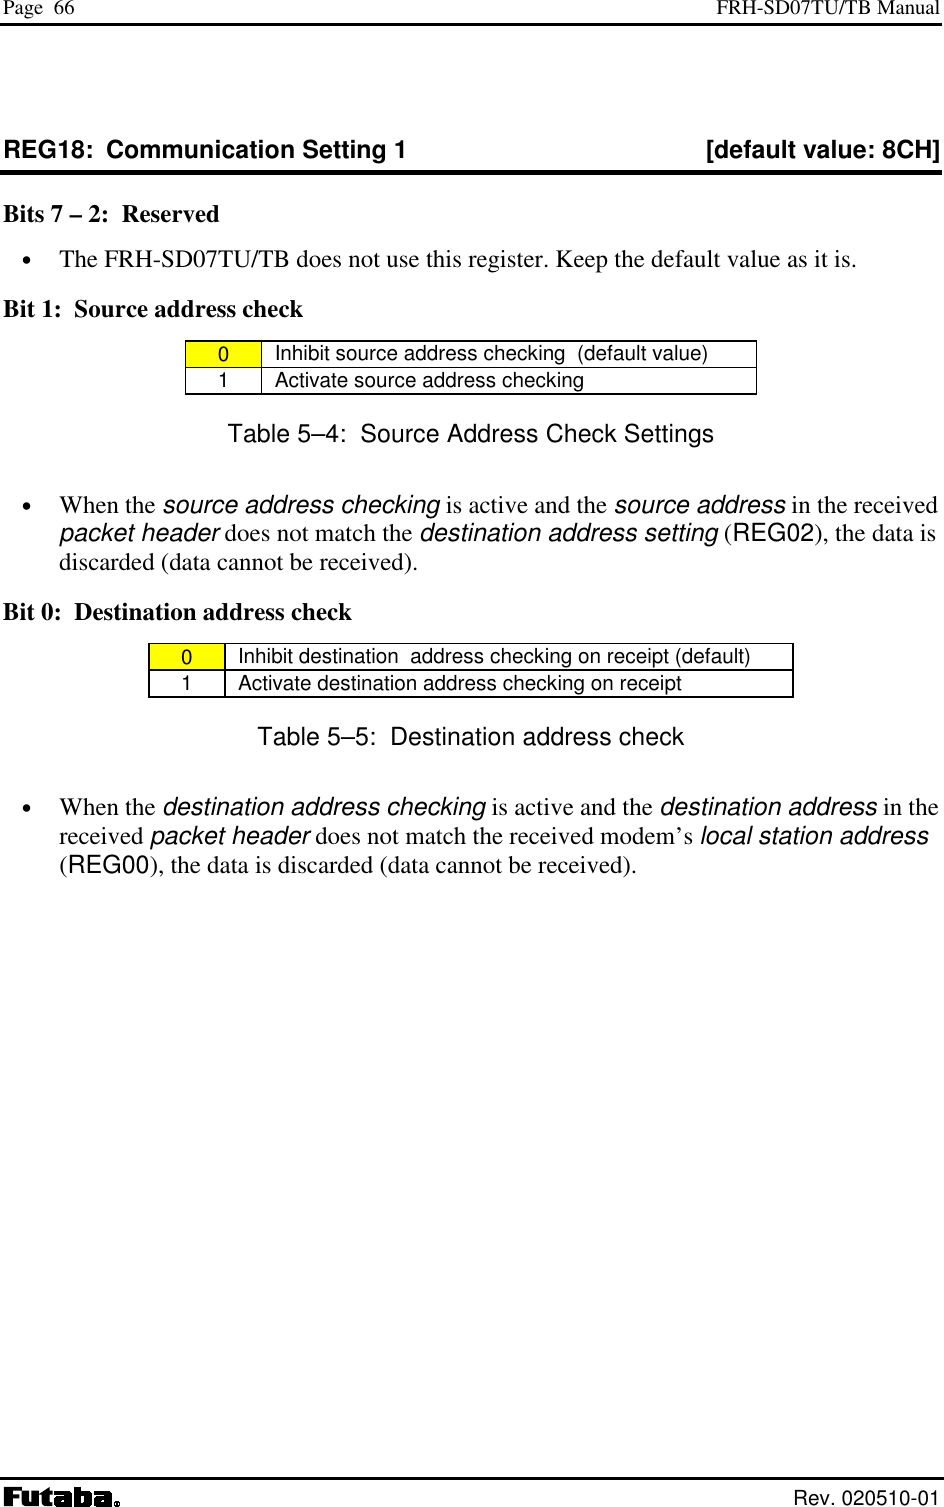 Page  66  FRH-SD07TU/TB Manual  Rev. 020510-01 REG18:  Communication Setting 1  [default value: 8CH] Bits 7 – 2:  Reserved •  The FRH-SD07TU/TB does not use this register. Keep the default value as it is. Bit 1:  Source address check 0   Inhibit source address checking  (default value) 1   Activate source address checking Table 5–4:  Source Address Check Settings •  When the source address checking is active and the source address in the received packet header does not match the destination address setting (REG02), the data is discarded (data cannot be received). Bit 0:  Destination address check 0   Inhibit destination  address checking on receipt (default) 1   Activate destination address checking on receipt Table 5–5:  Destination address check •  When the destination address checking is active and the destination address in the received packet header does not match the received modem’s local station address (REG00), the data is discarded (data cannot be received). 